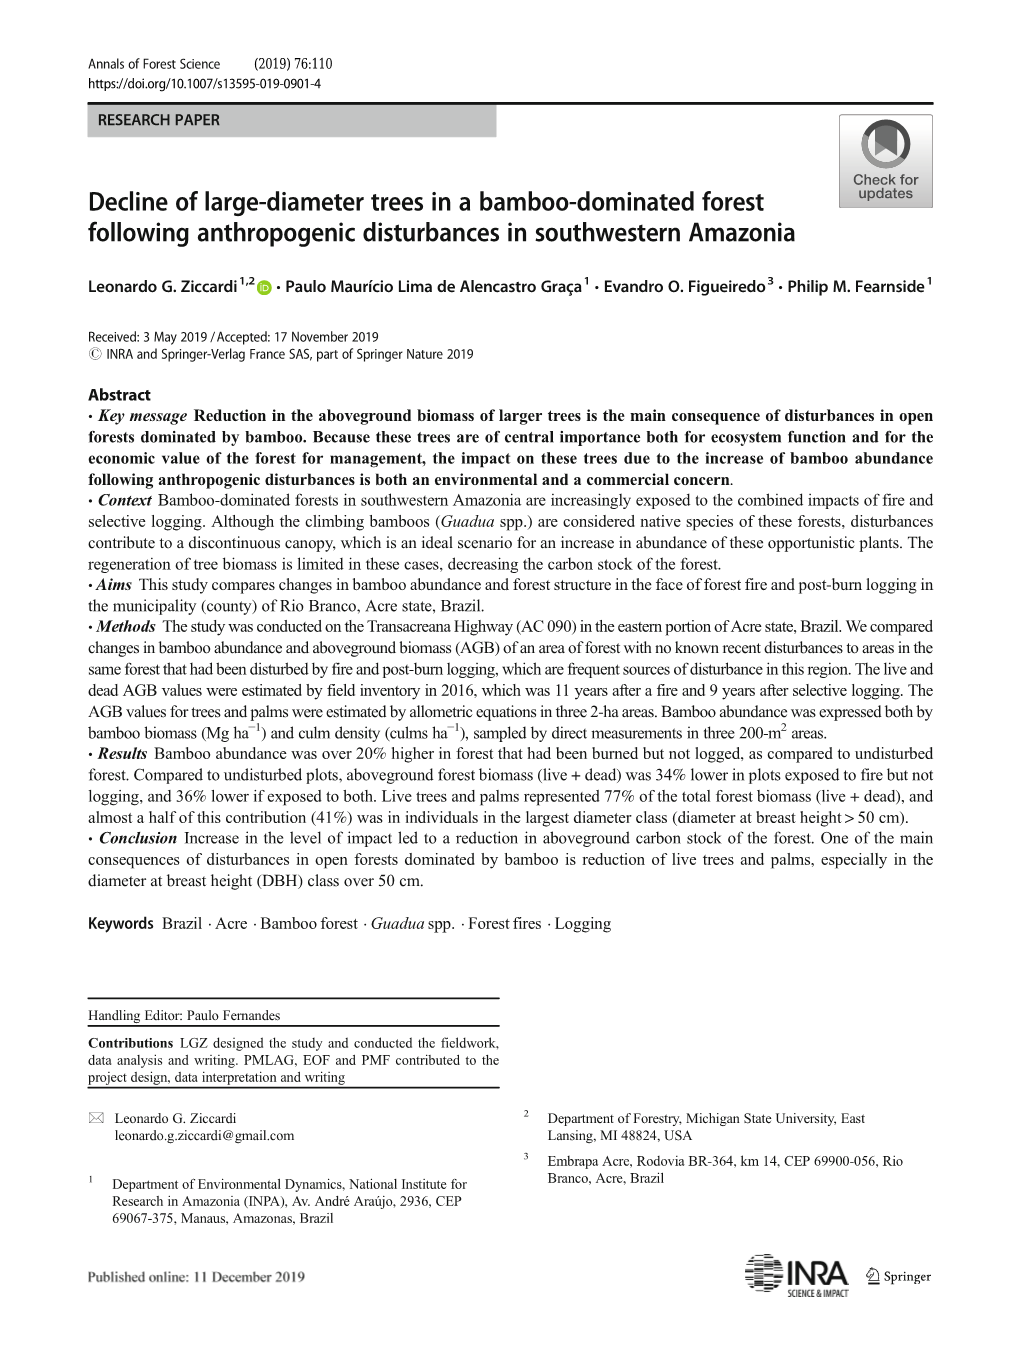 Decline of Large-Diameter Trees in a Bamboo-Dominated Forest Following Anthropogenic Disturbances in Southwestern Amazonia